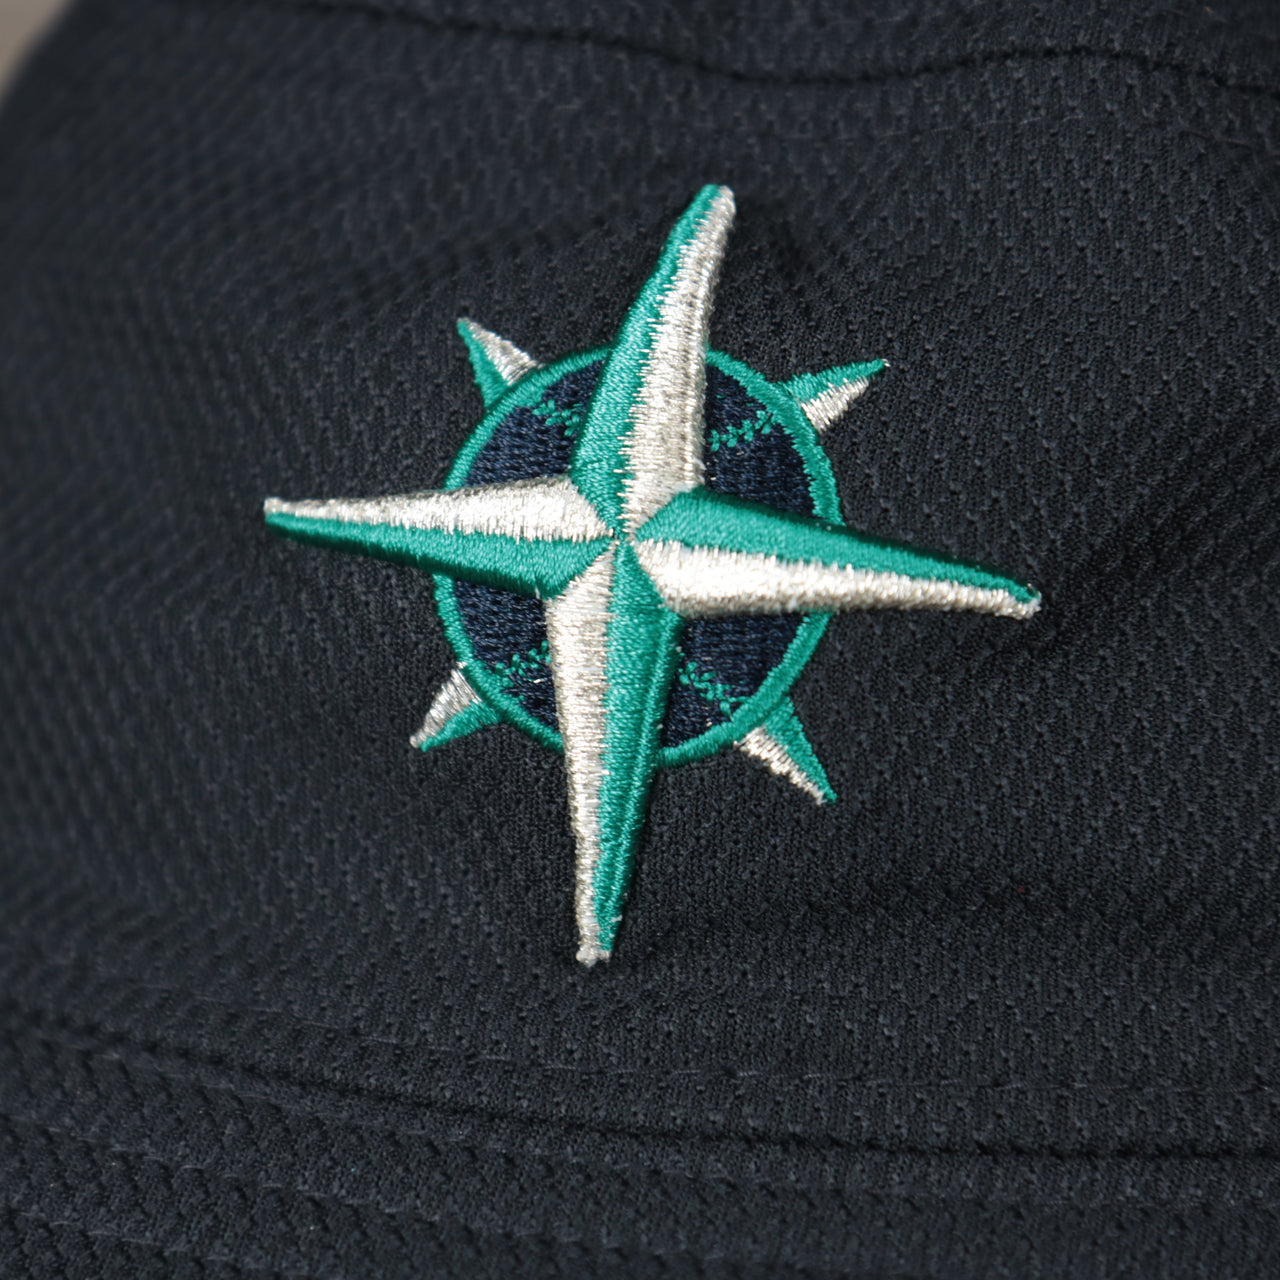 A close up of the Mariners logo on the Seattle Mariners MLB 2022 Spring Training Onfield Bucket Hat